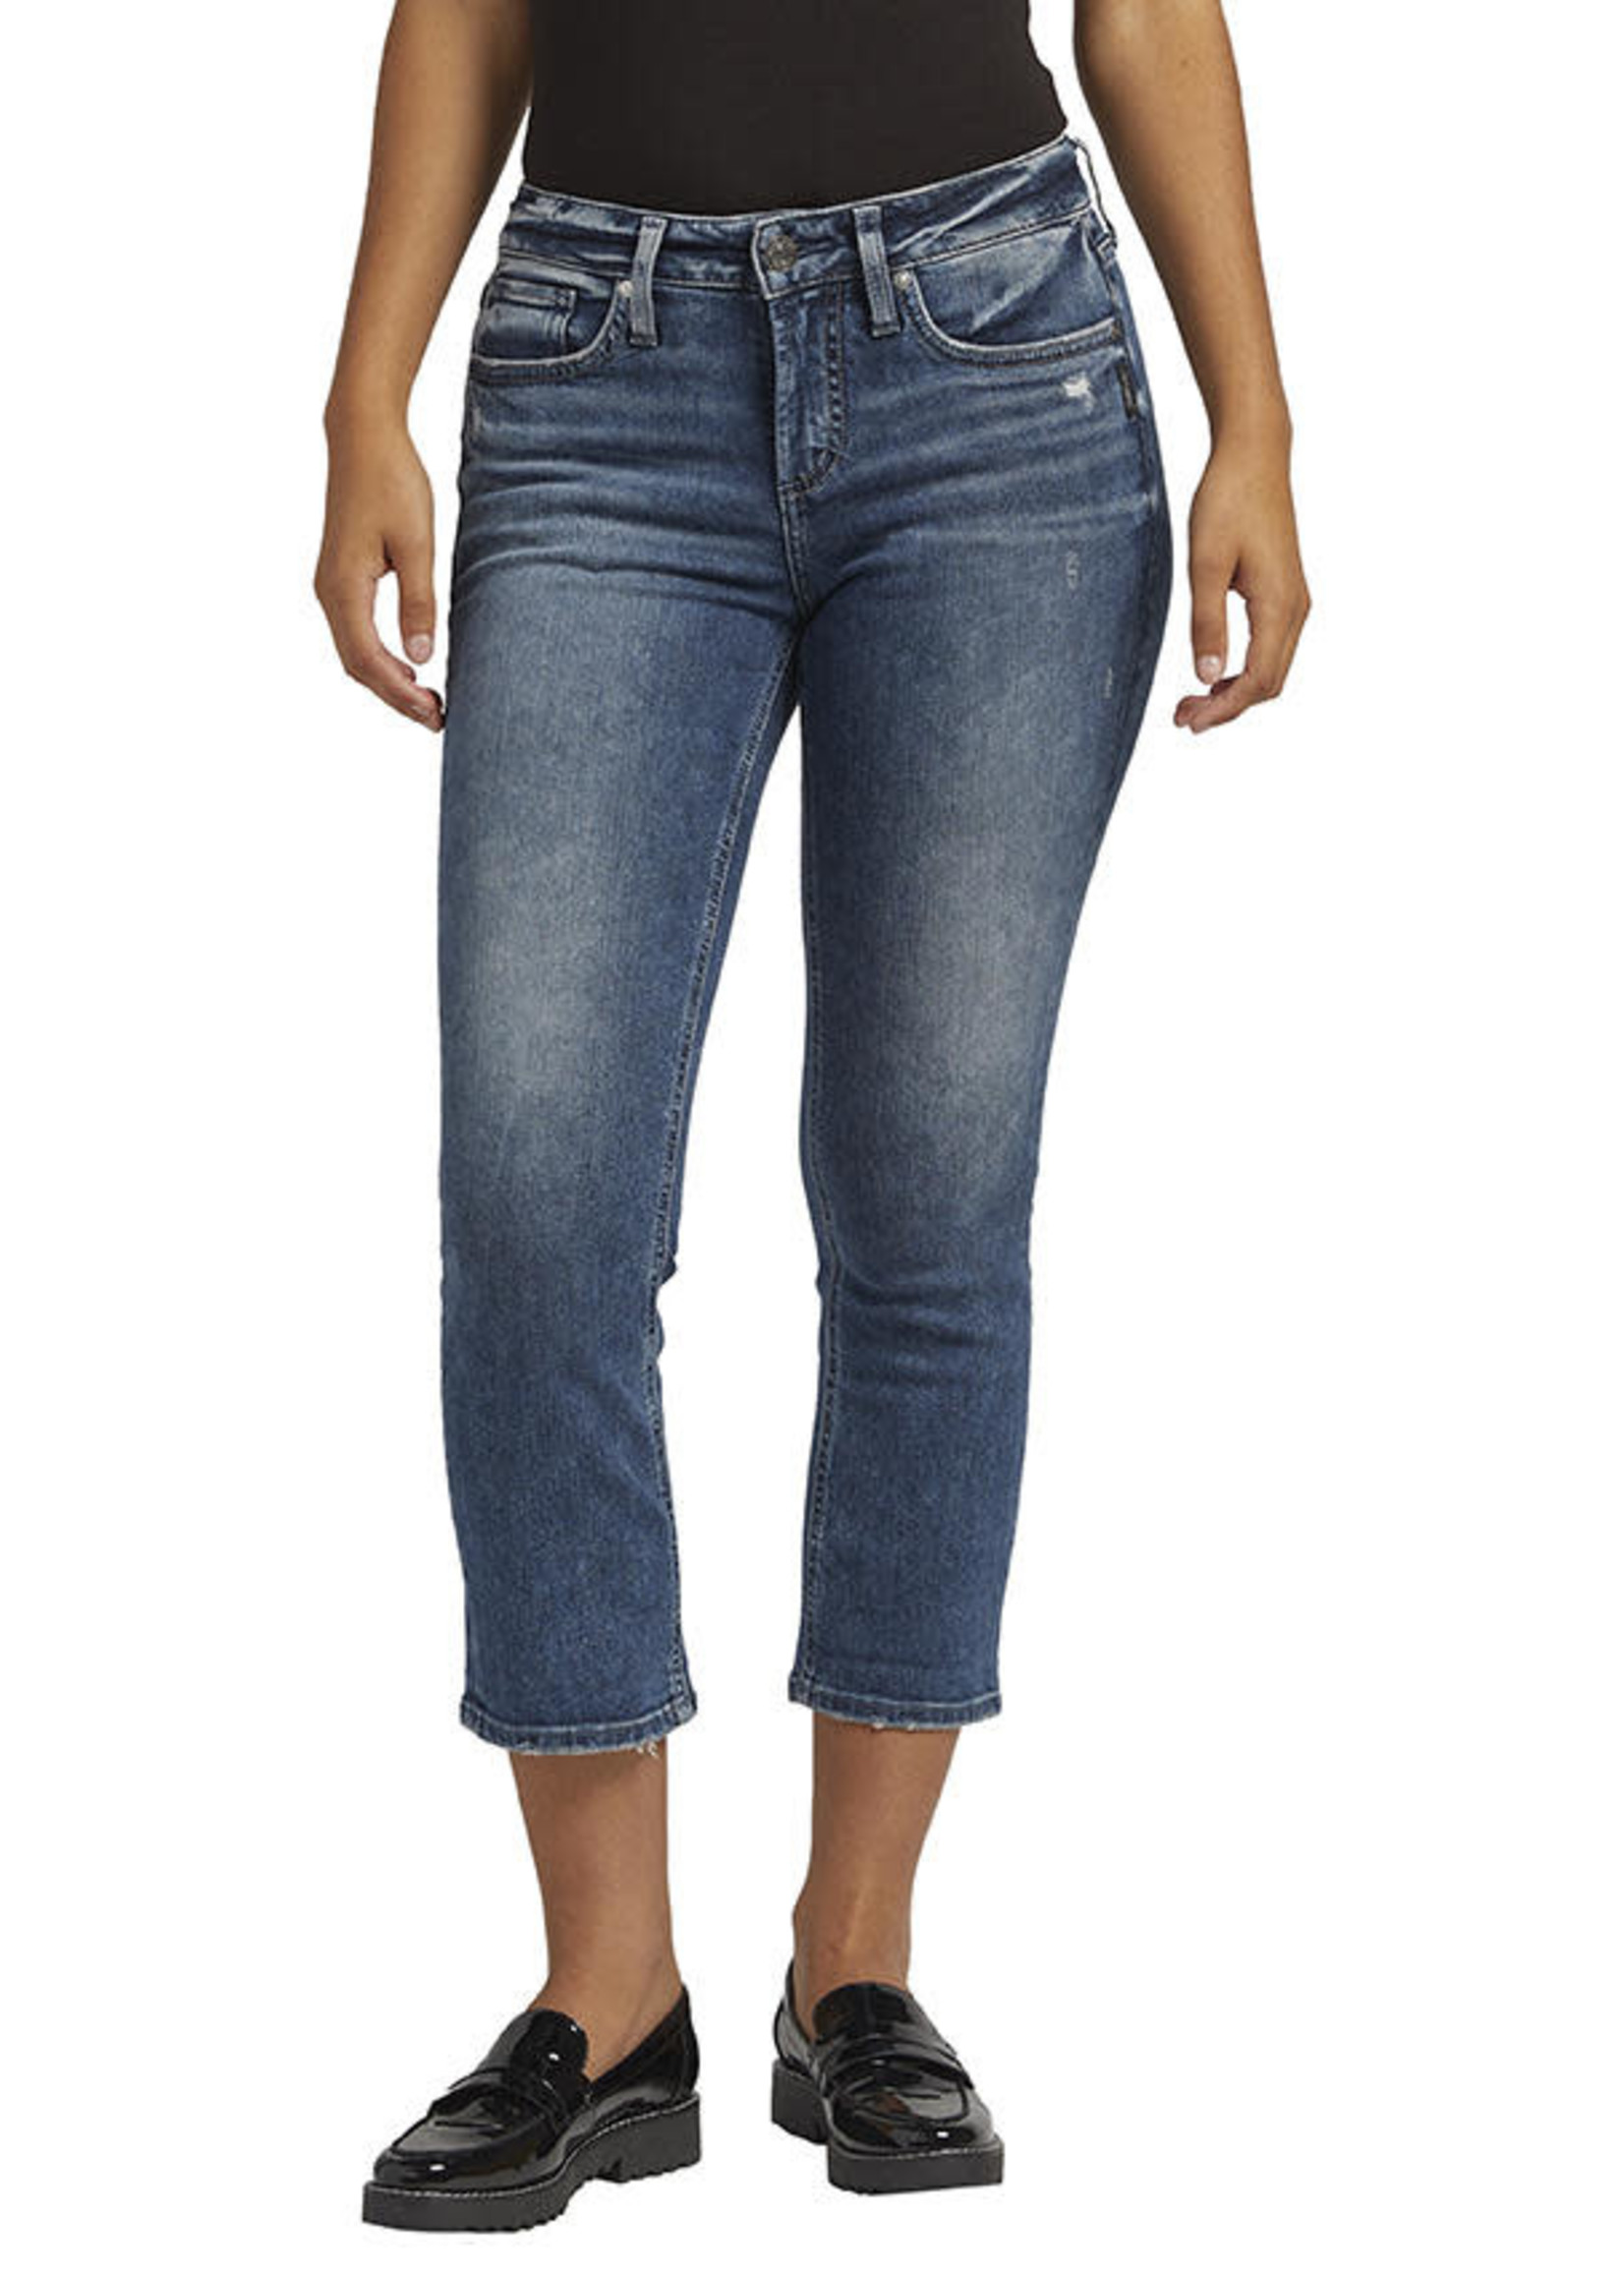 SILVER JEANS SILVER-JEANS-L43920EPX392